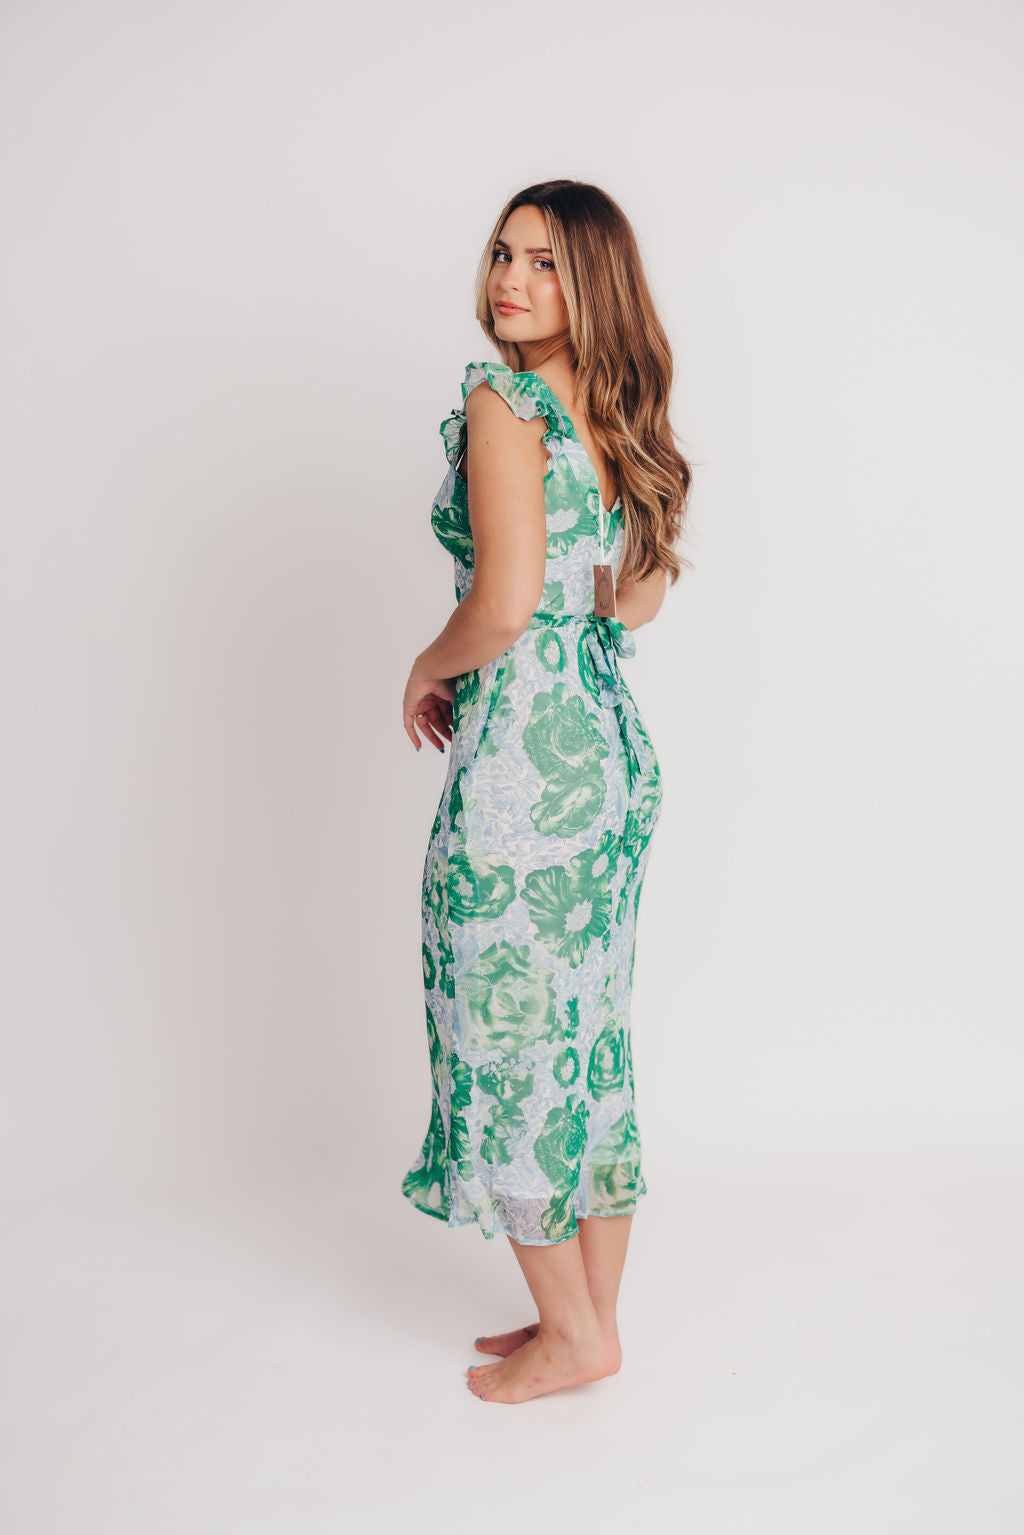 Pisa Floral Chiffon Midi Dress with Ruffle Shoulder in Green/Blue